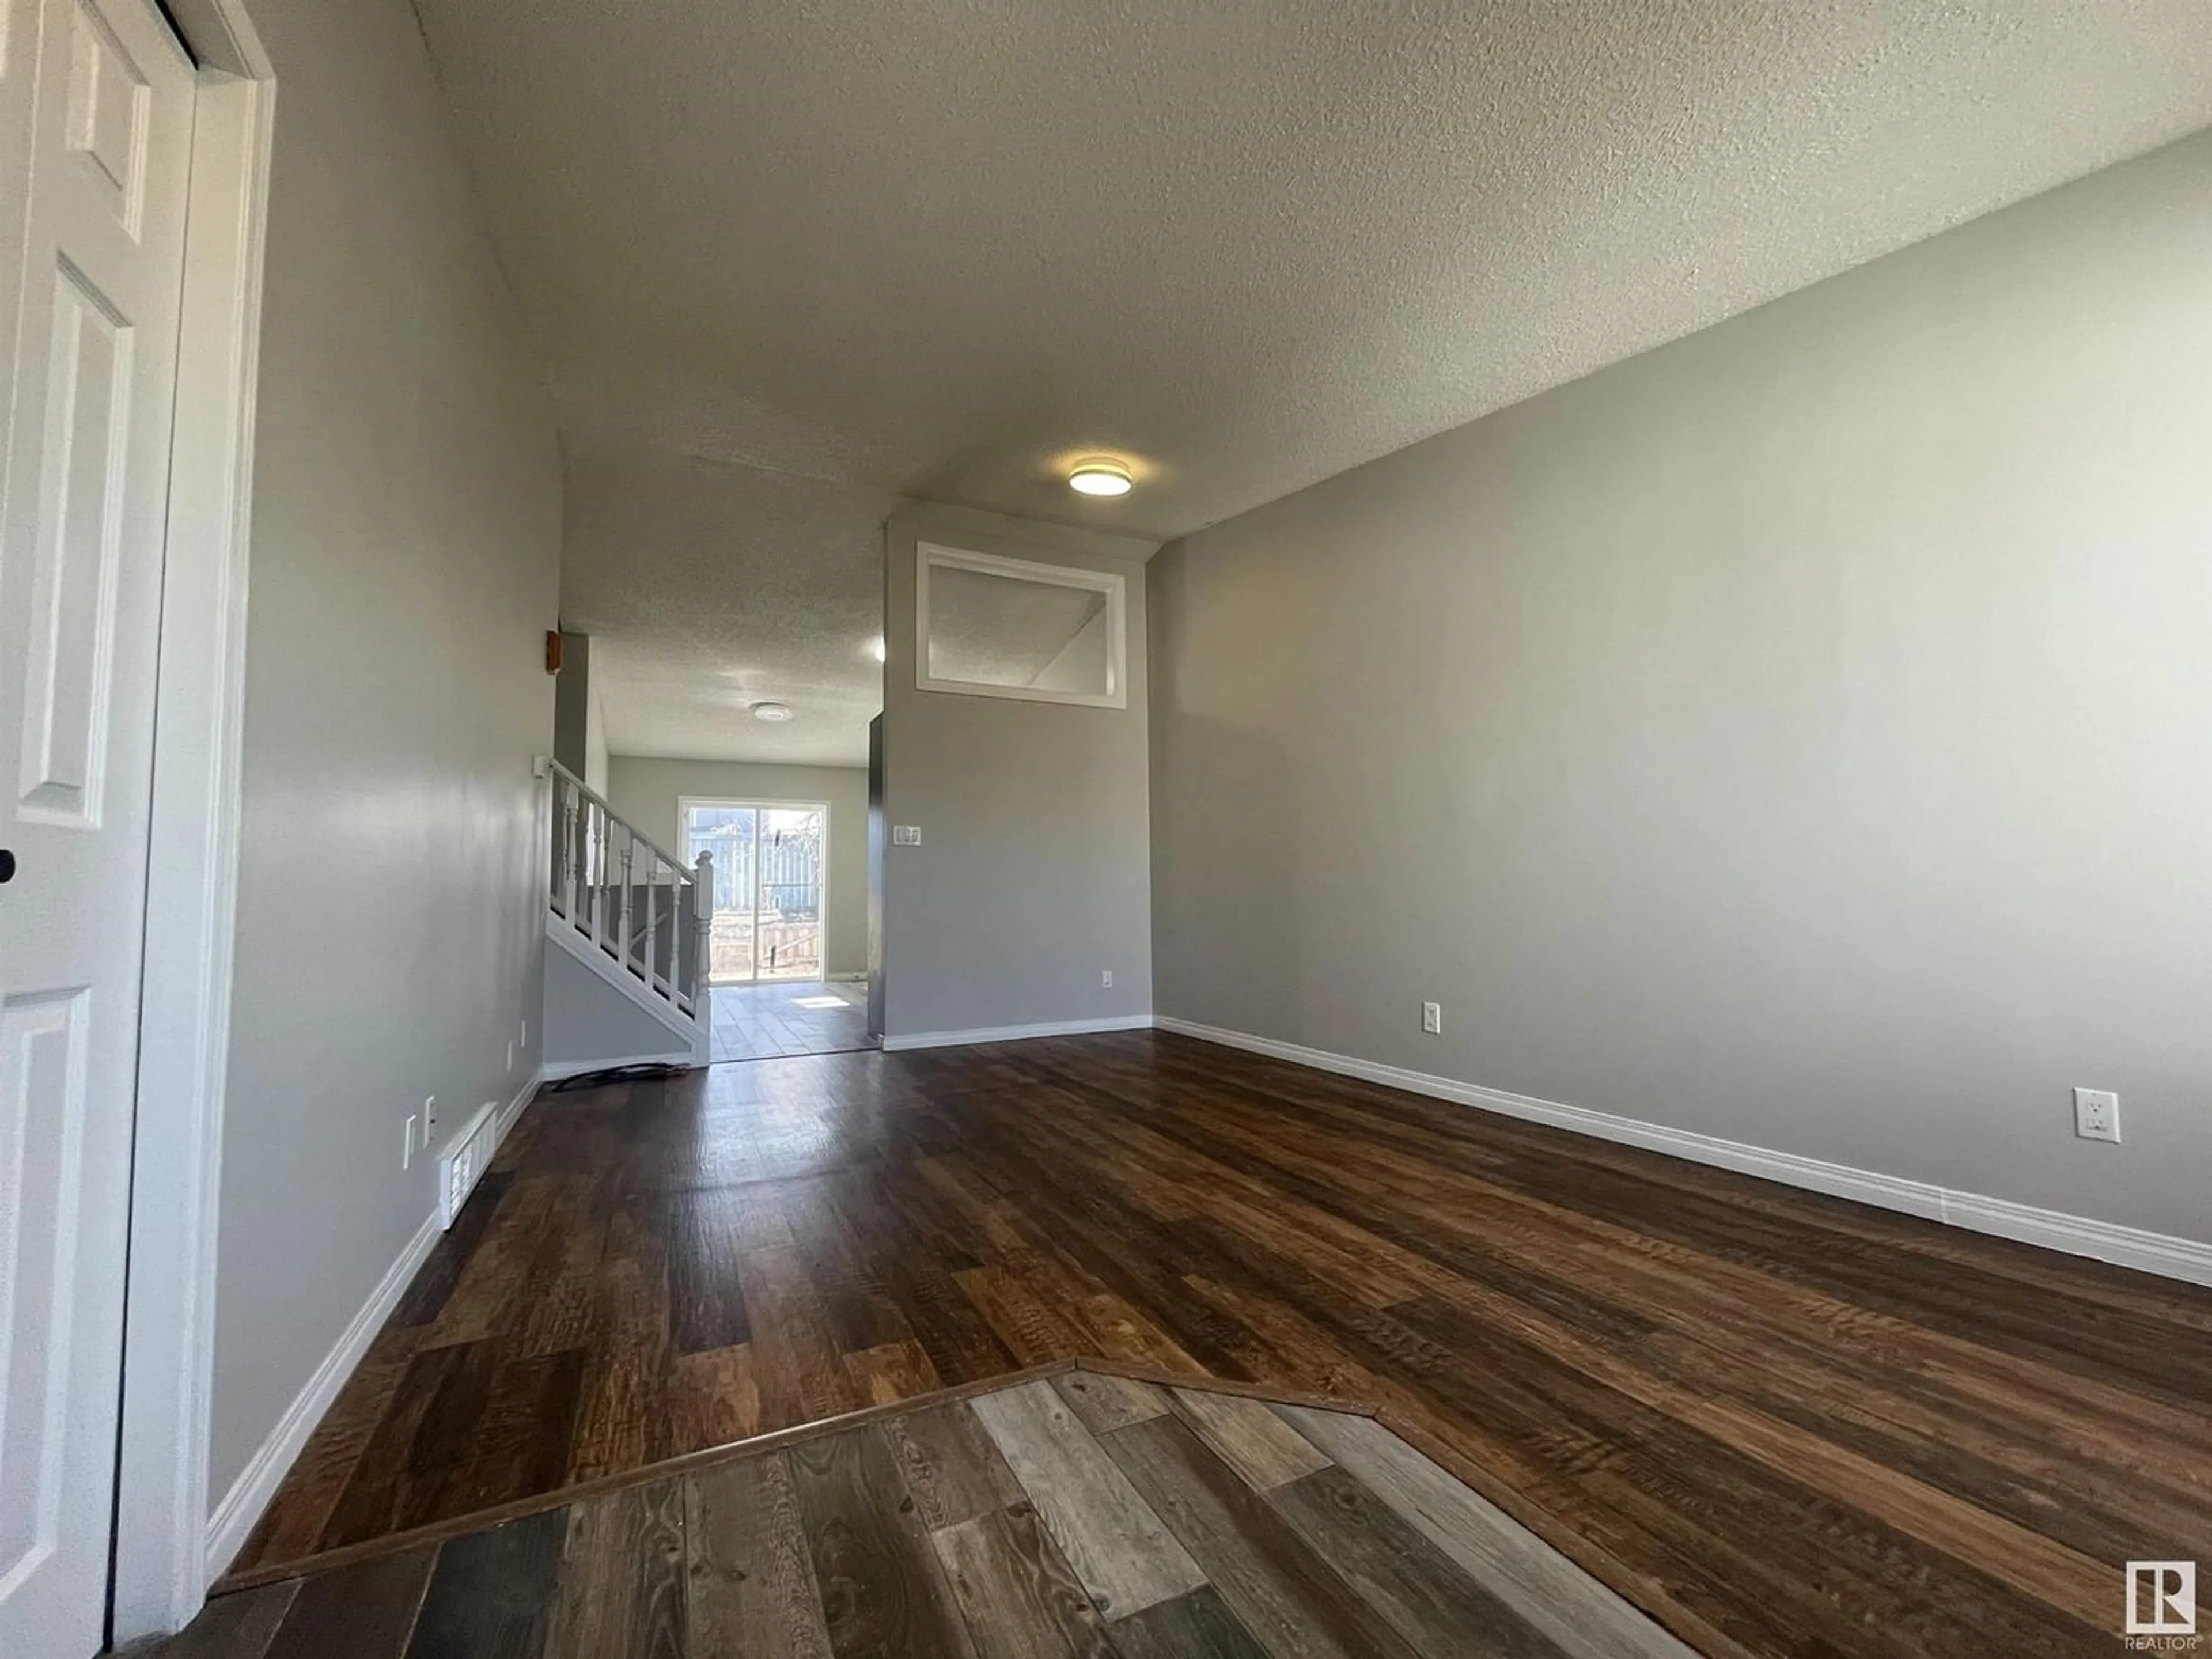 A pic of a room for 1557 49A ST NW, Edmonton Alberta T6L6Y6